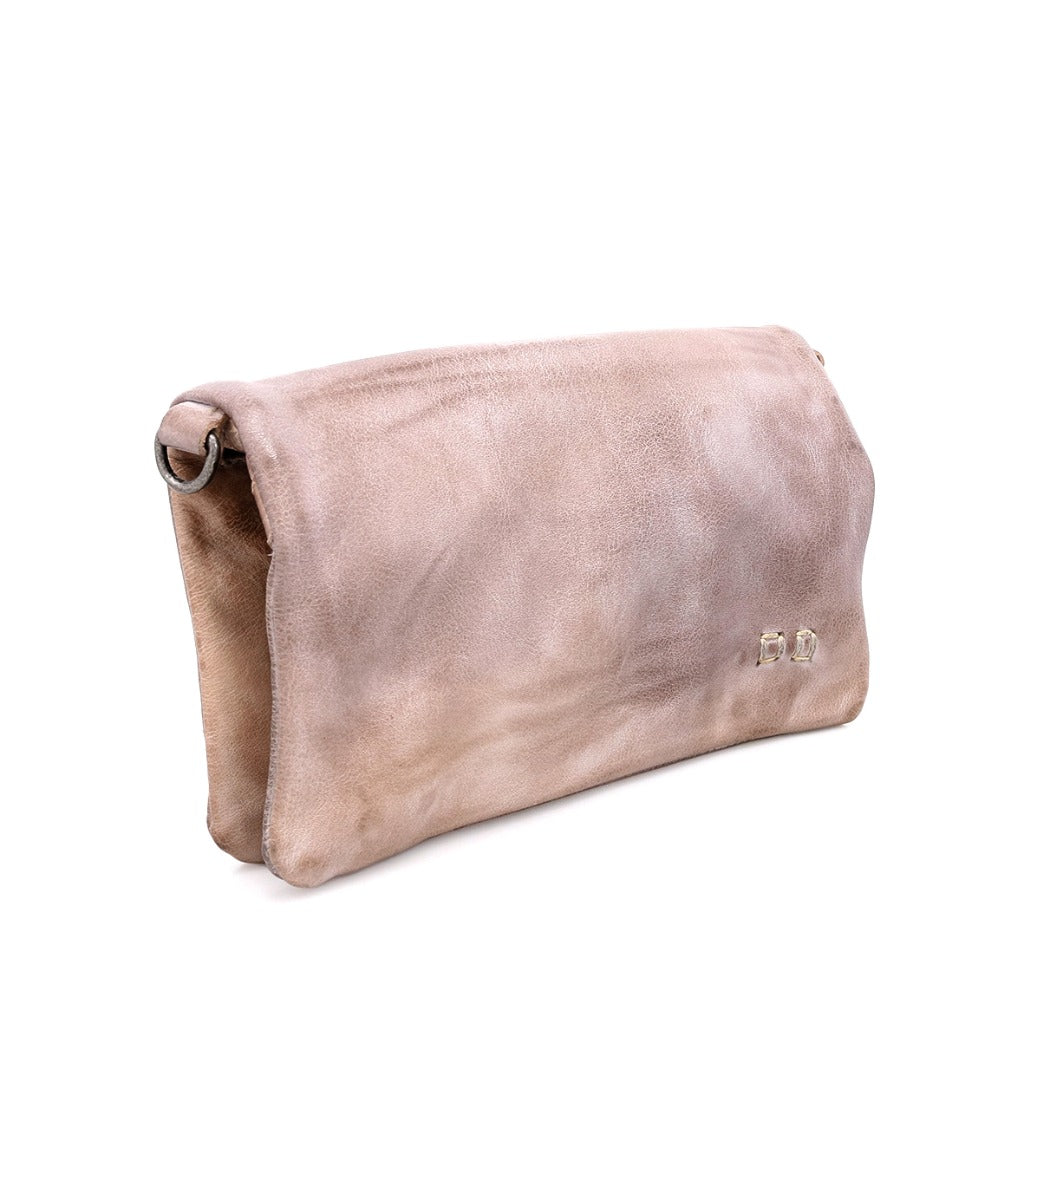 A Cadence light grey pure leather clutch bag by Bed Stu.